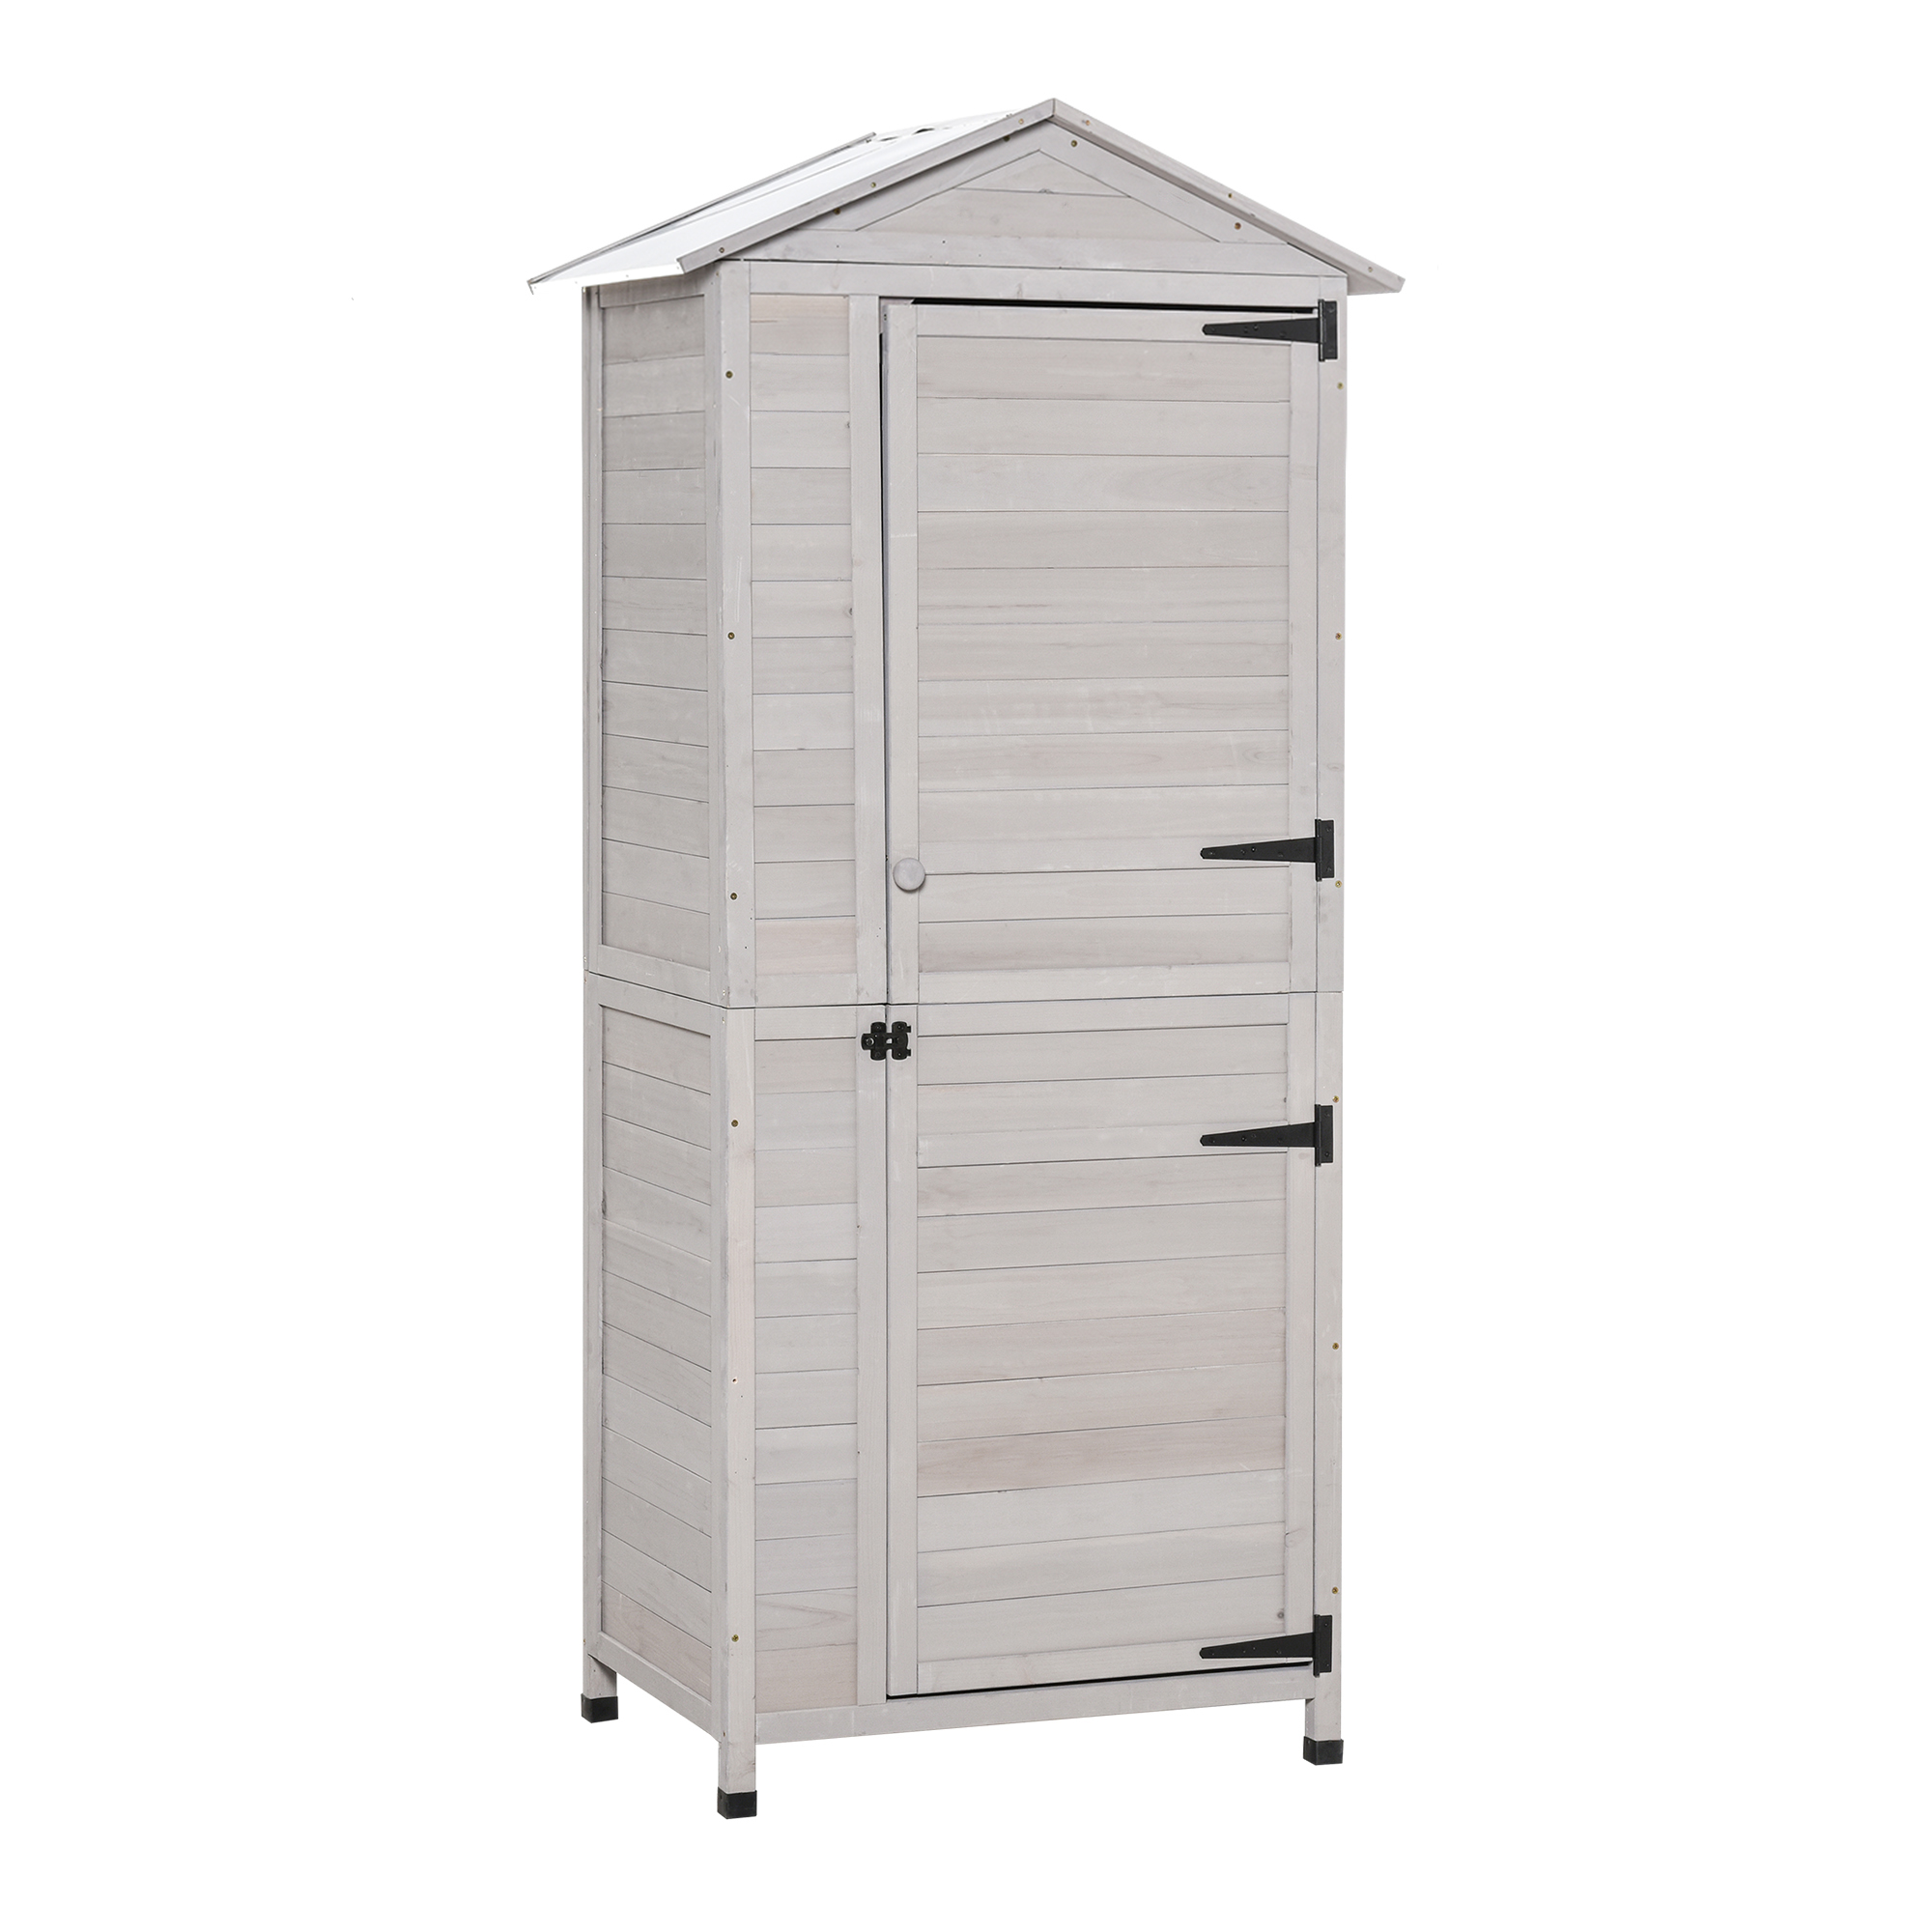 Outdoor Wooden Garden Shed, Tool Shed w/ Shelves Light Grey